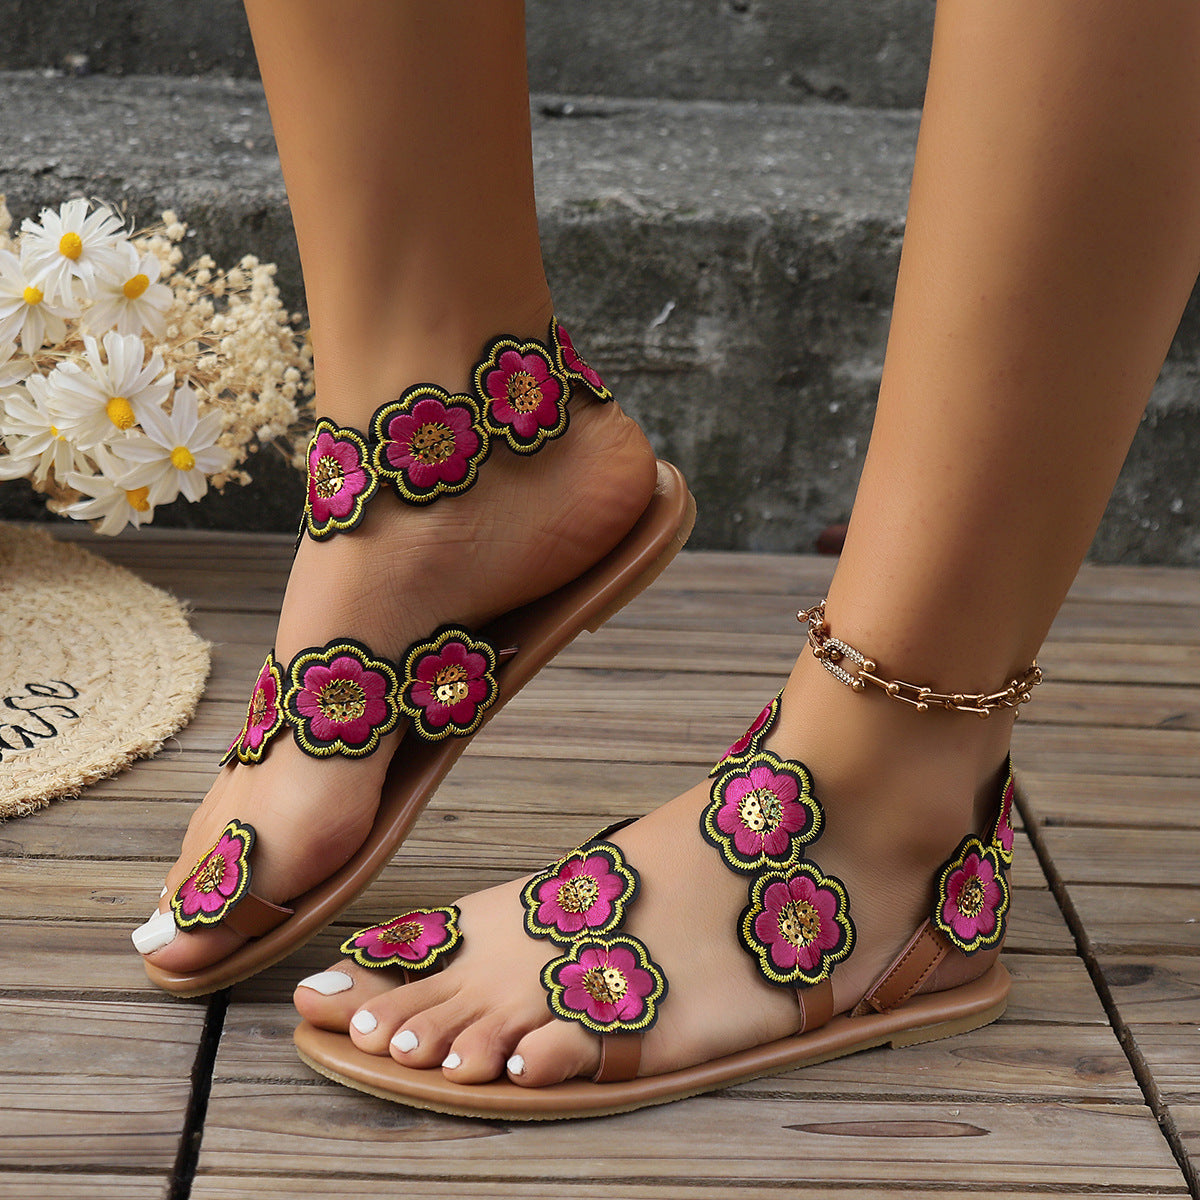 Ethnic Style Flowers Flat Sandals Summer Vacation Casual Clip Toe Beach Shoes For Women - ZENICO